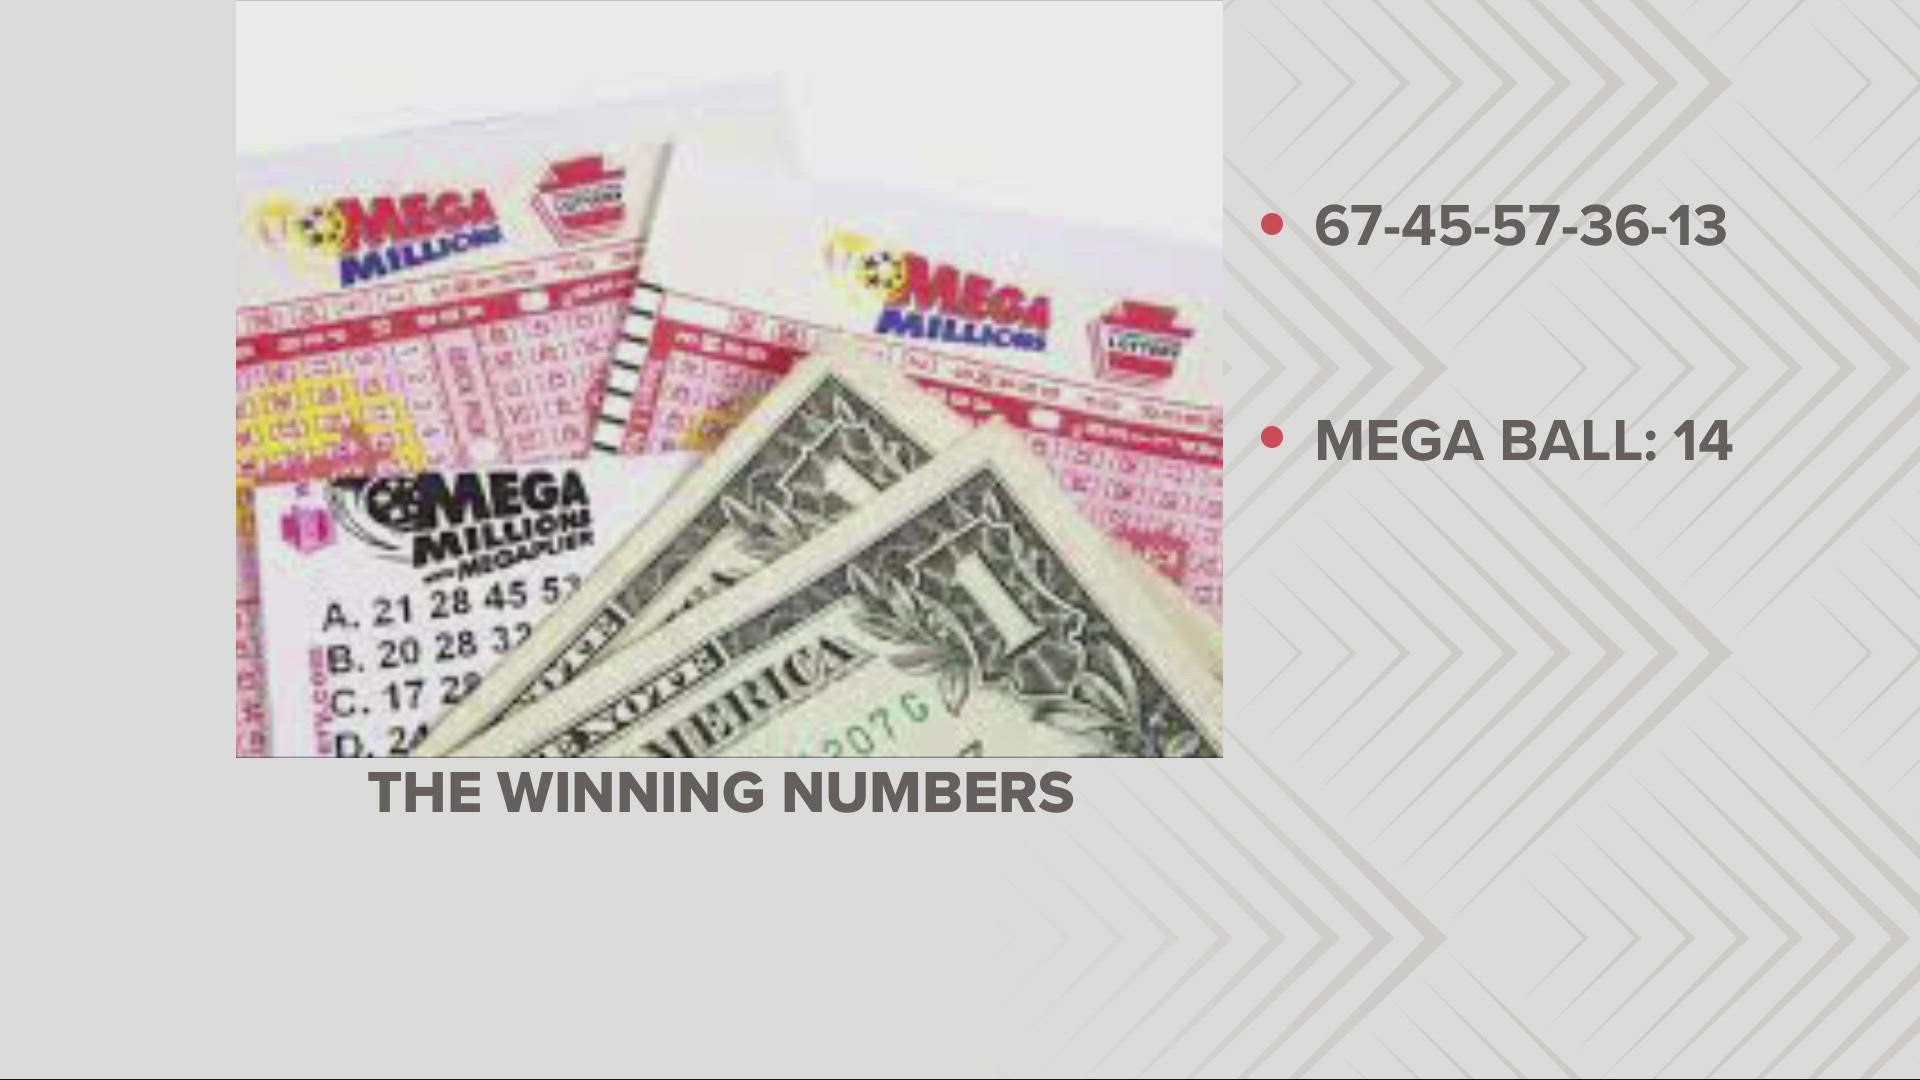 Friday's estimated grand prize was roughly $1.28 billion.